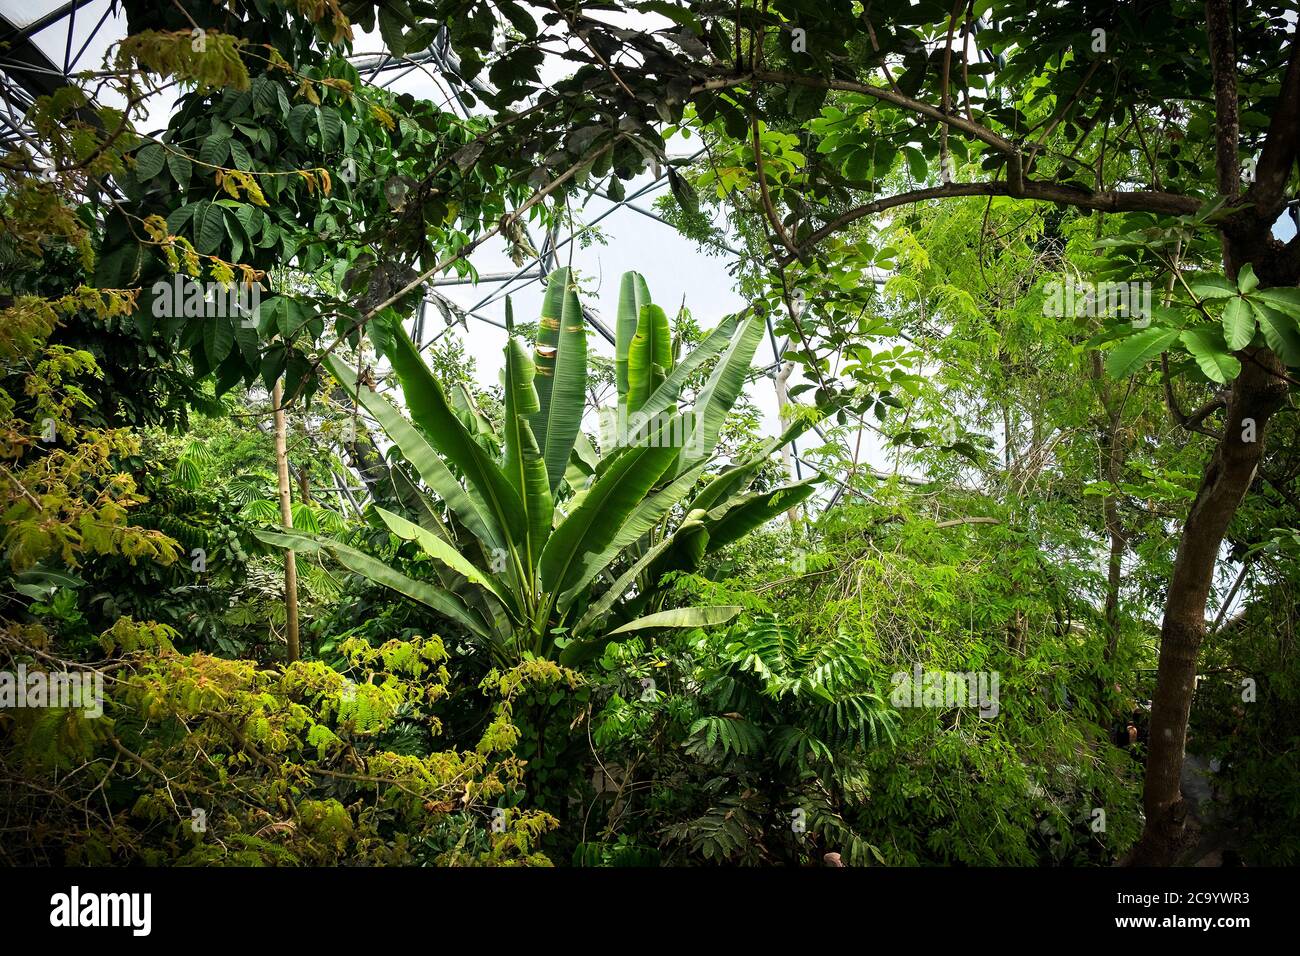 Sub tropical plants and trees inside the rainforest Biome at the Eden project complex in Cornwall. Stock Photo